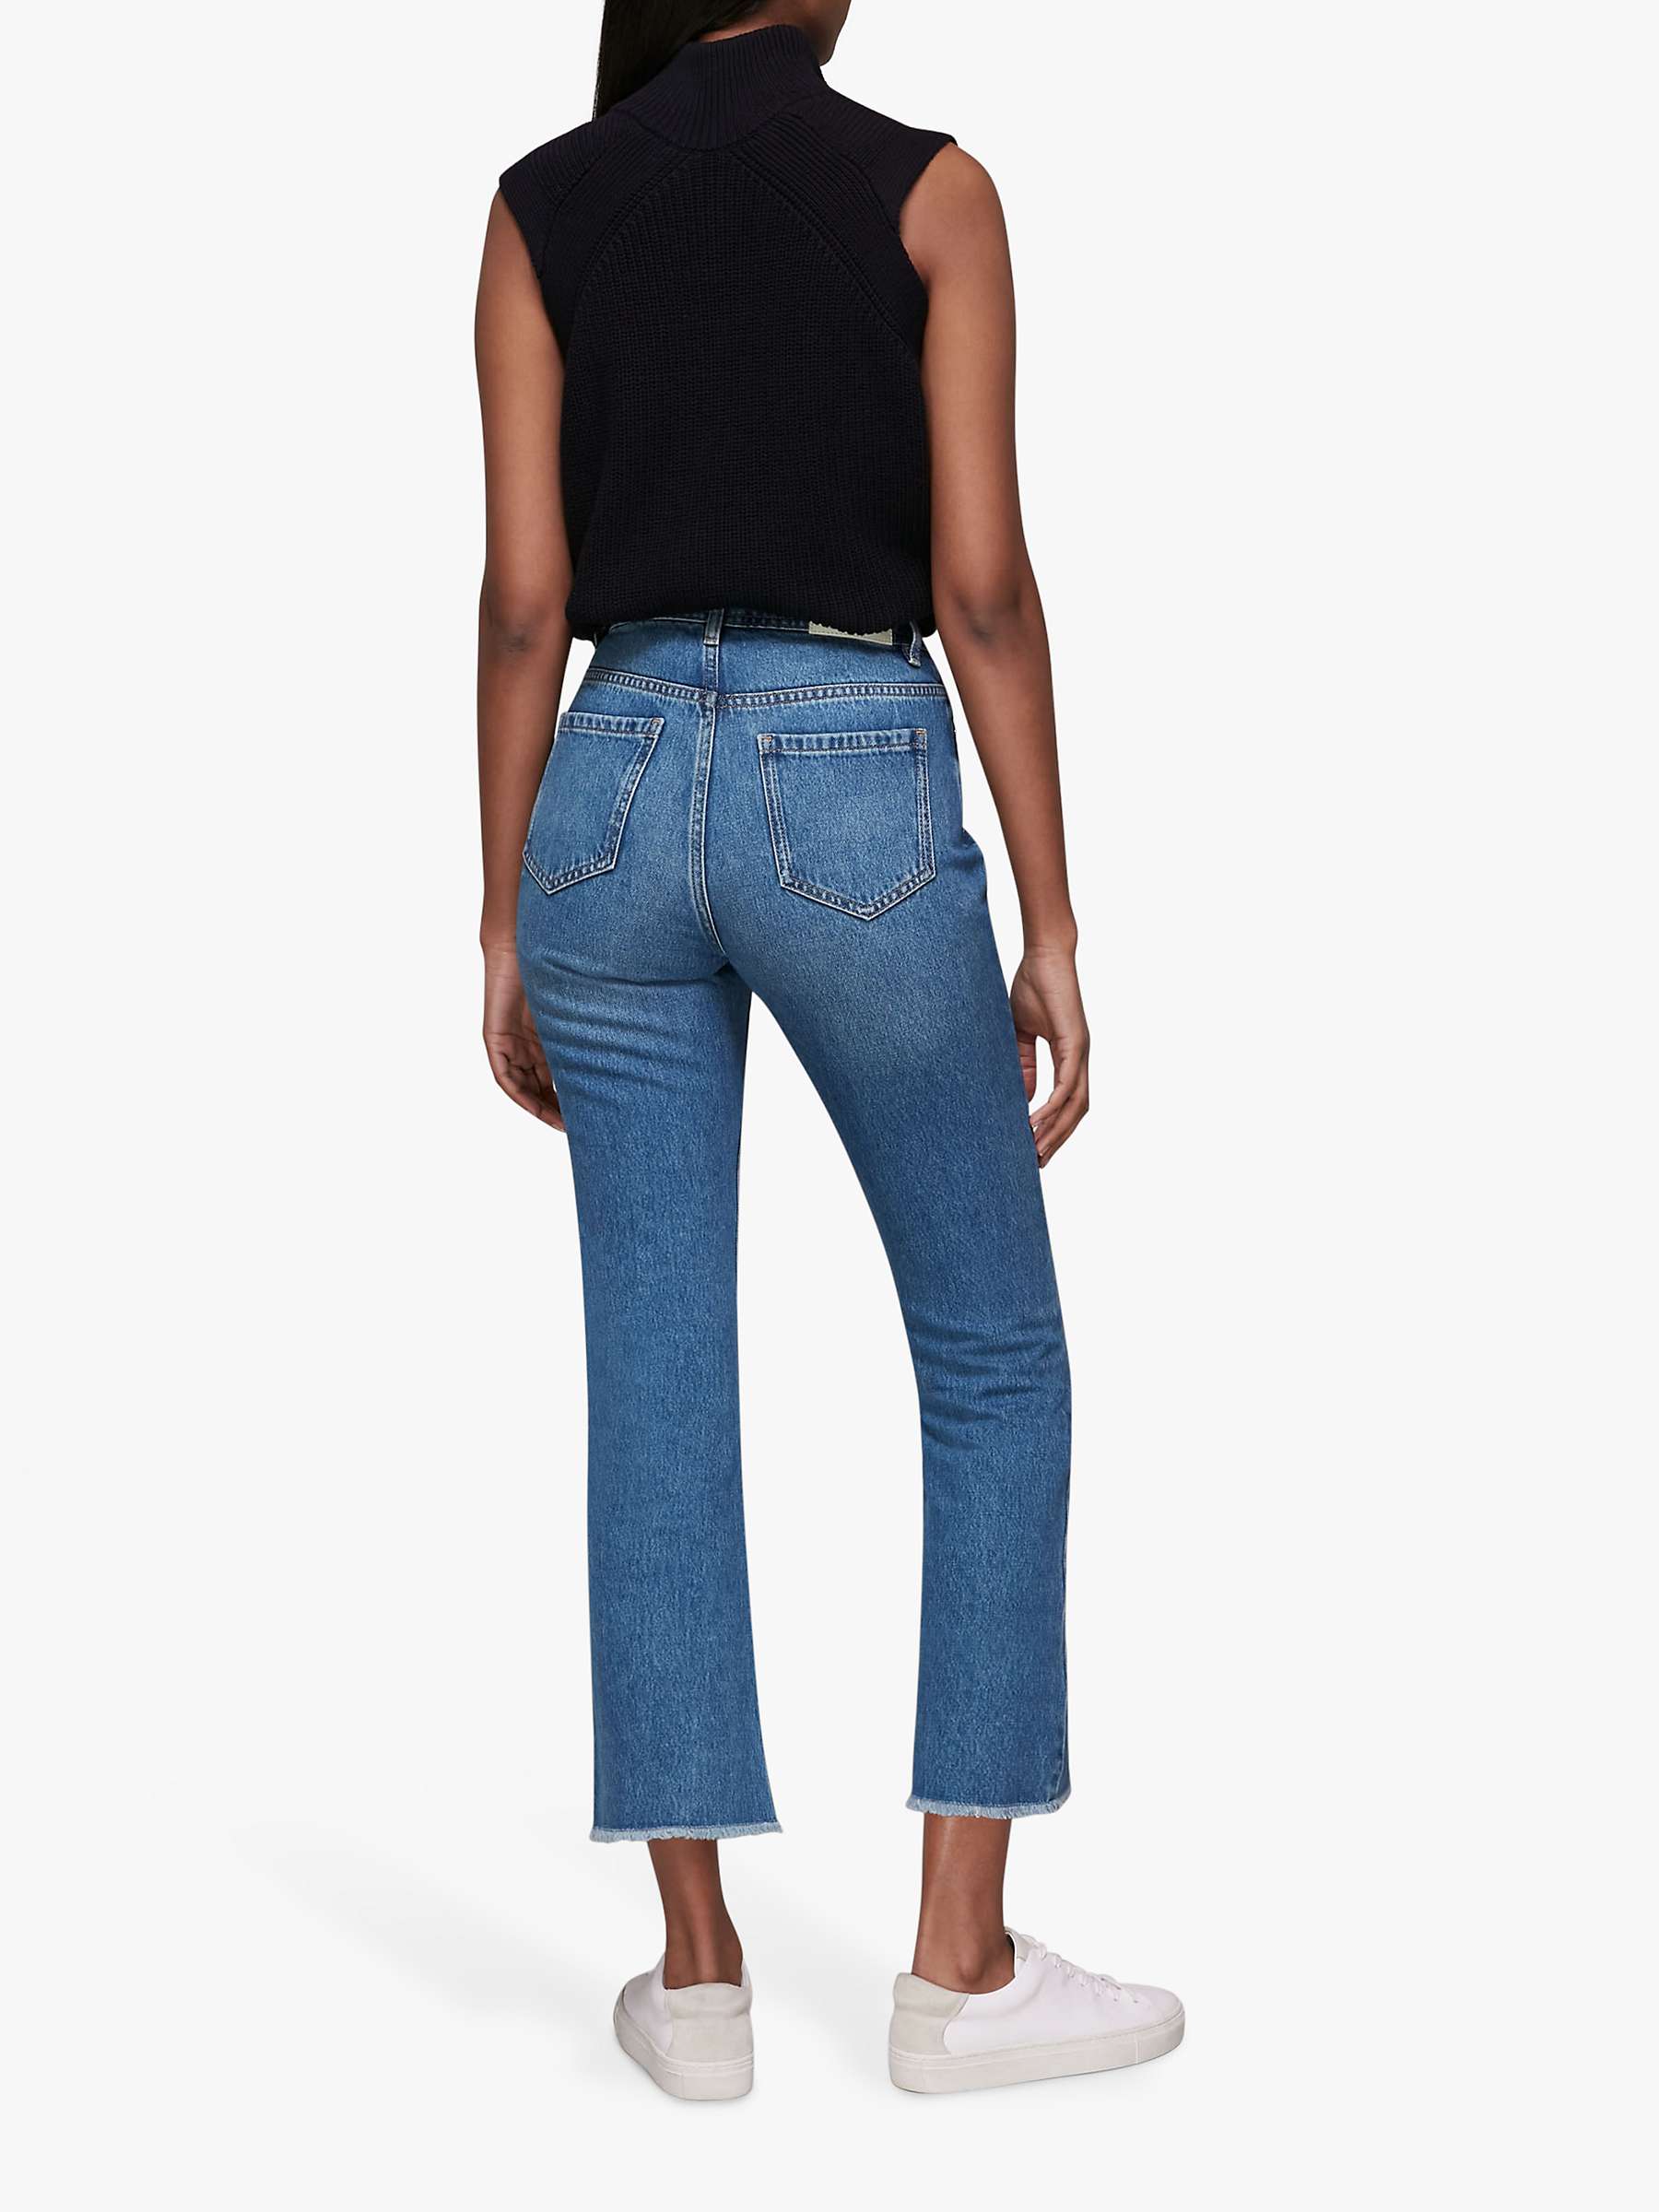 Buy Whistles Kick Flare Jeans Online at johnlewis.com